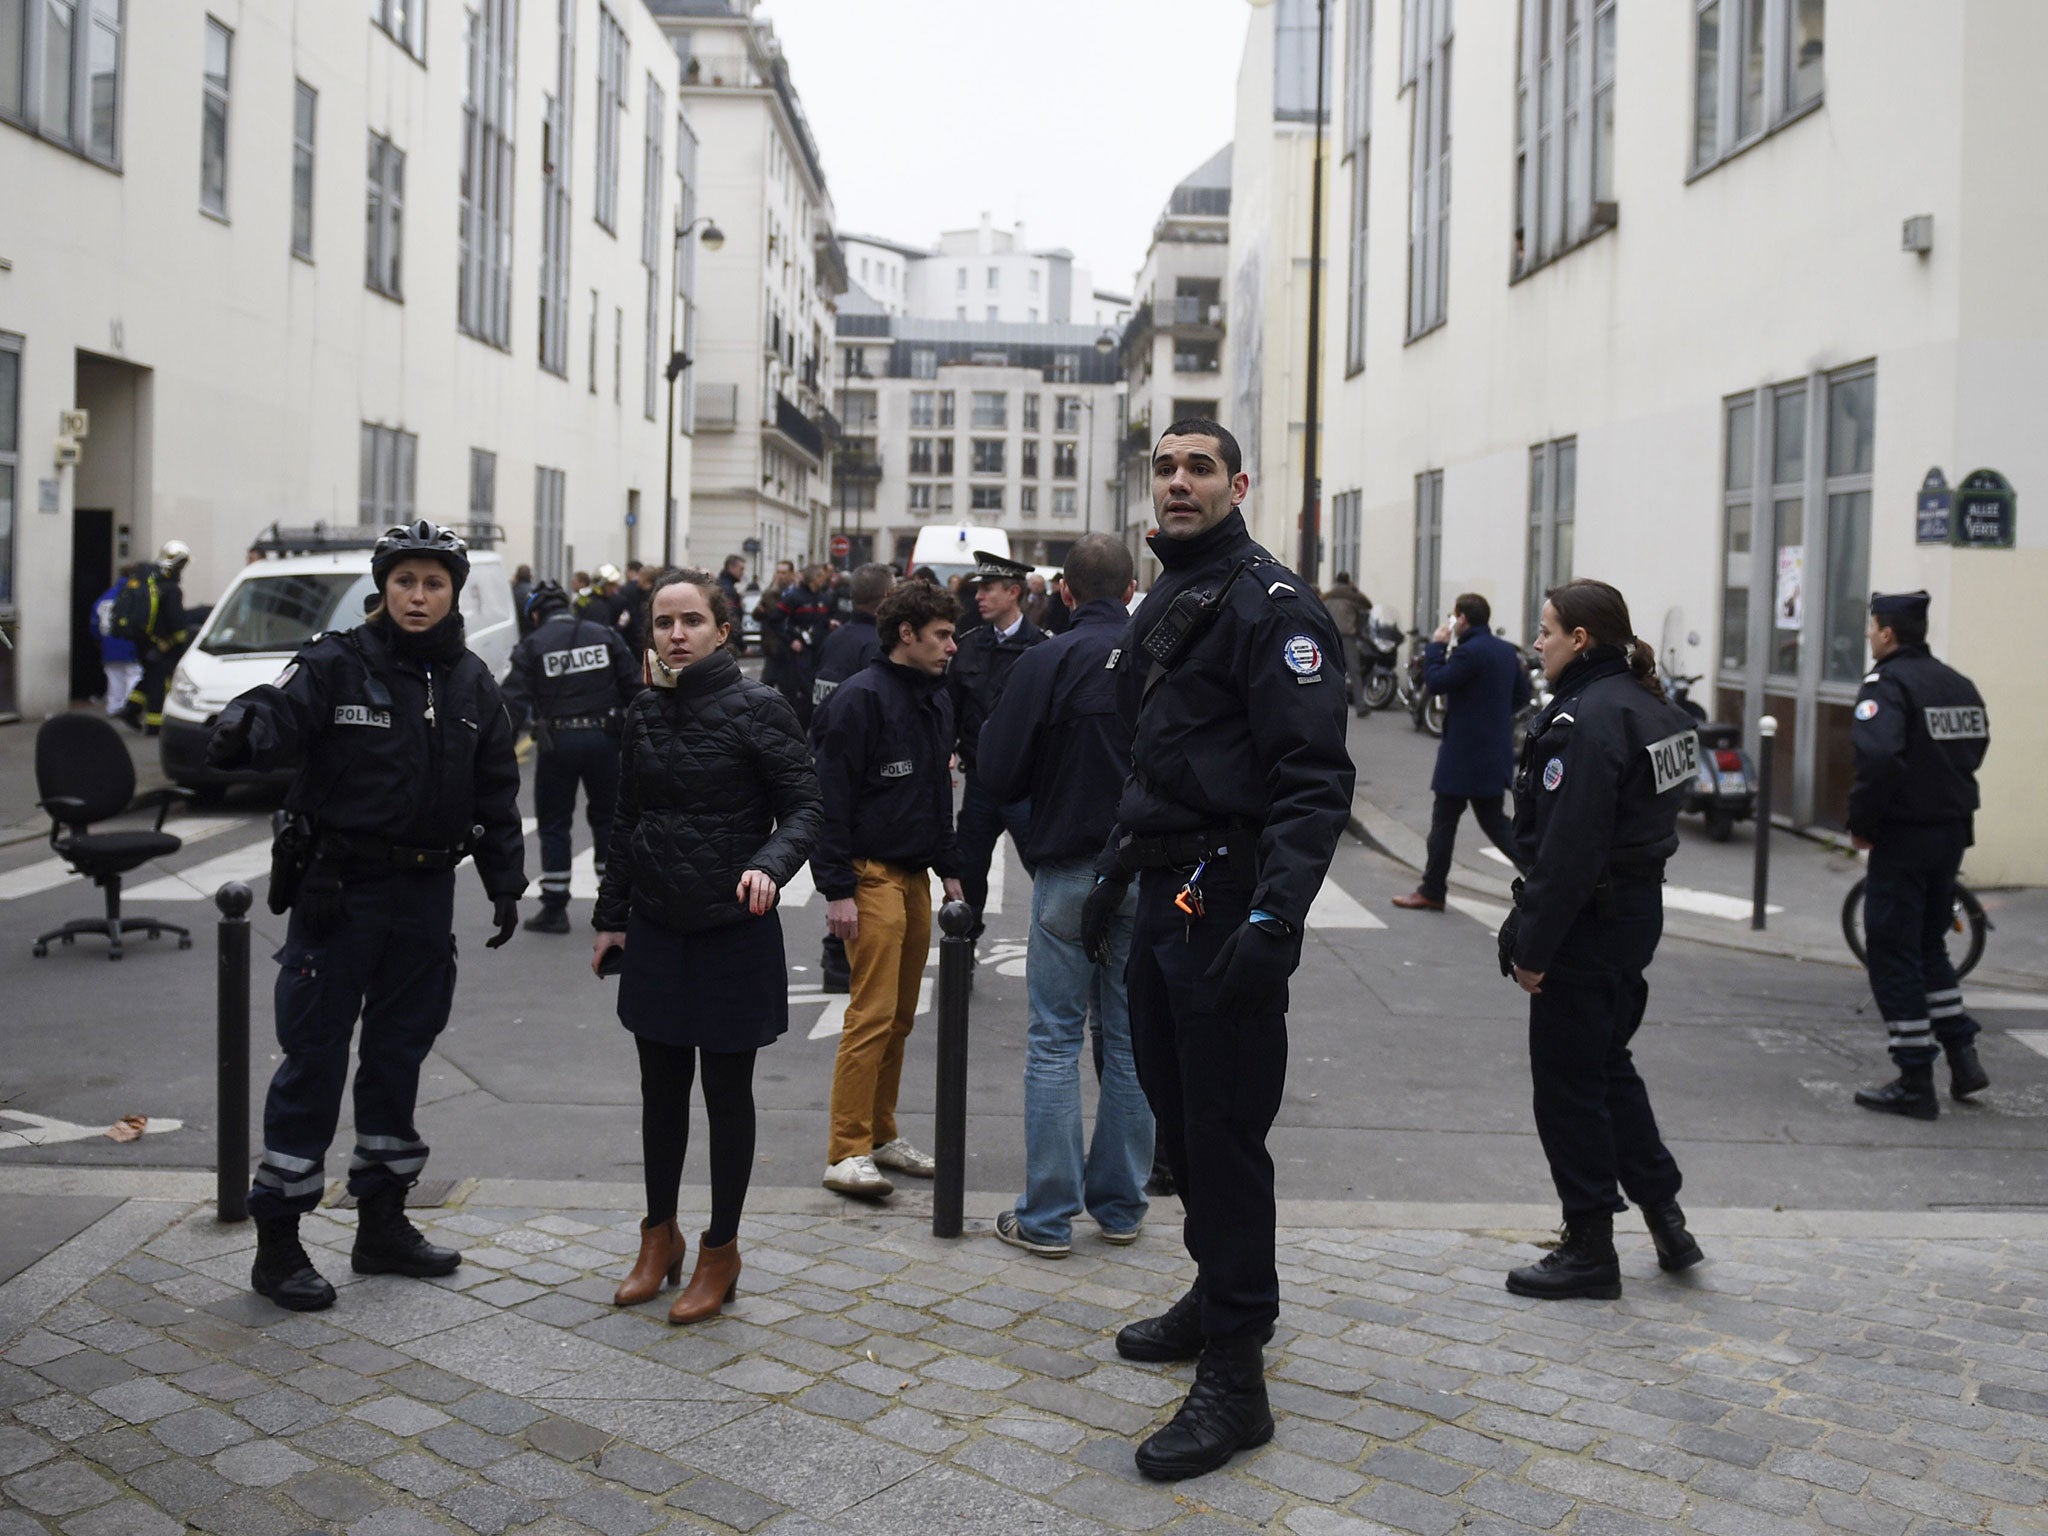 Police forces gather in street outside the offices of the French satirical newspaper Charlie Hebdo in Paris 